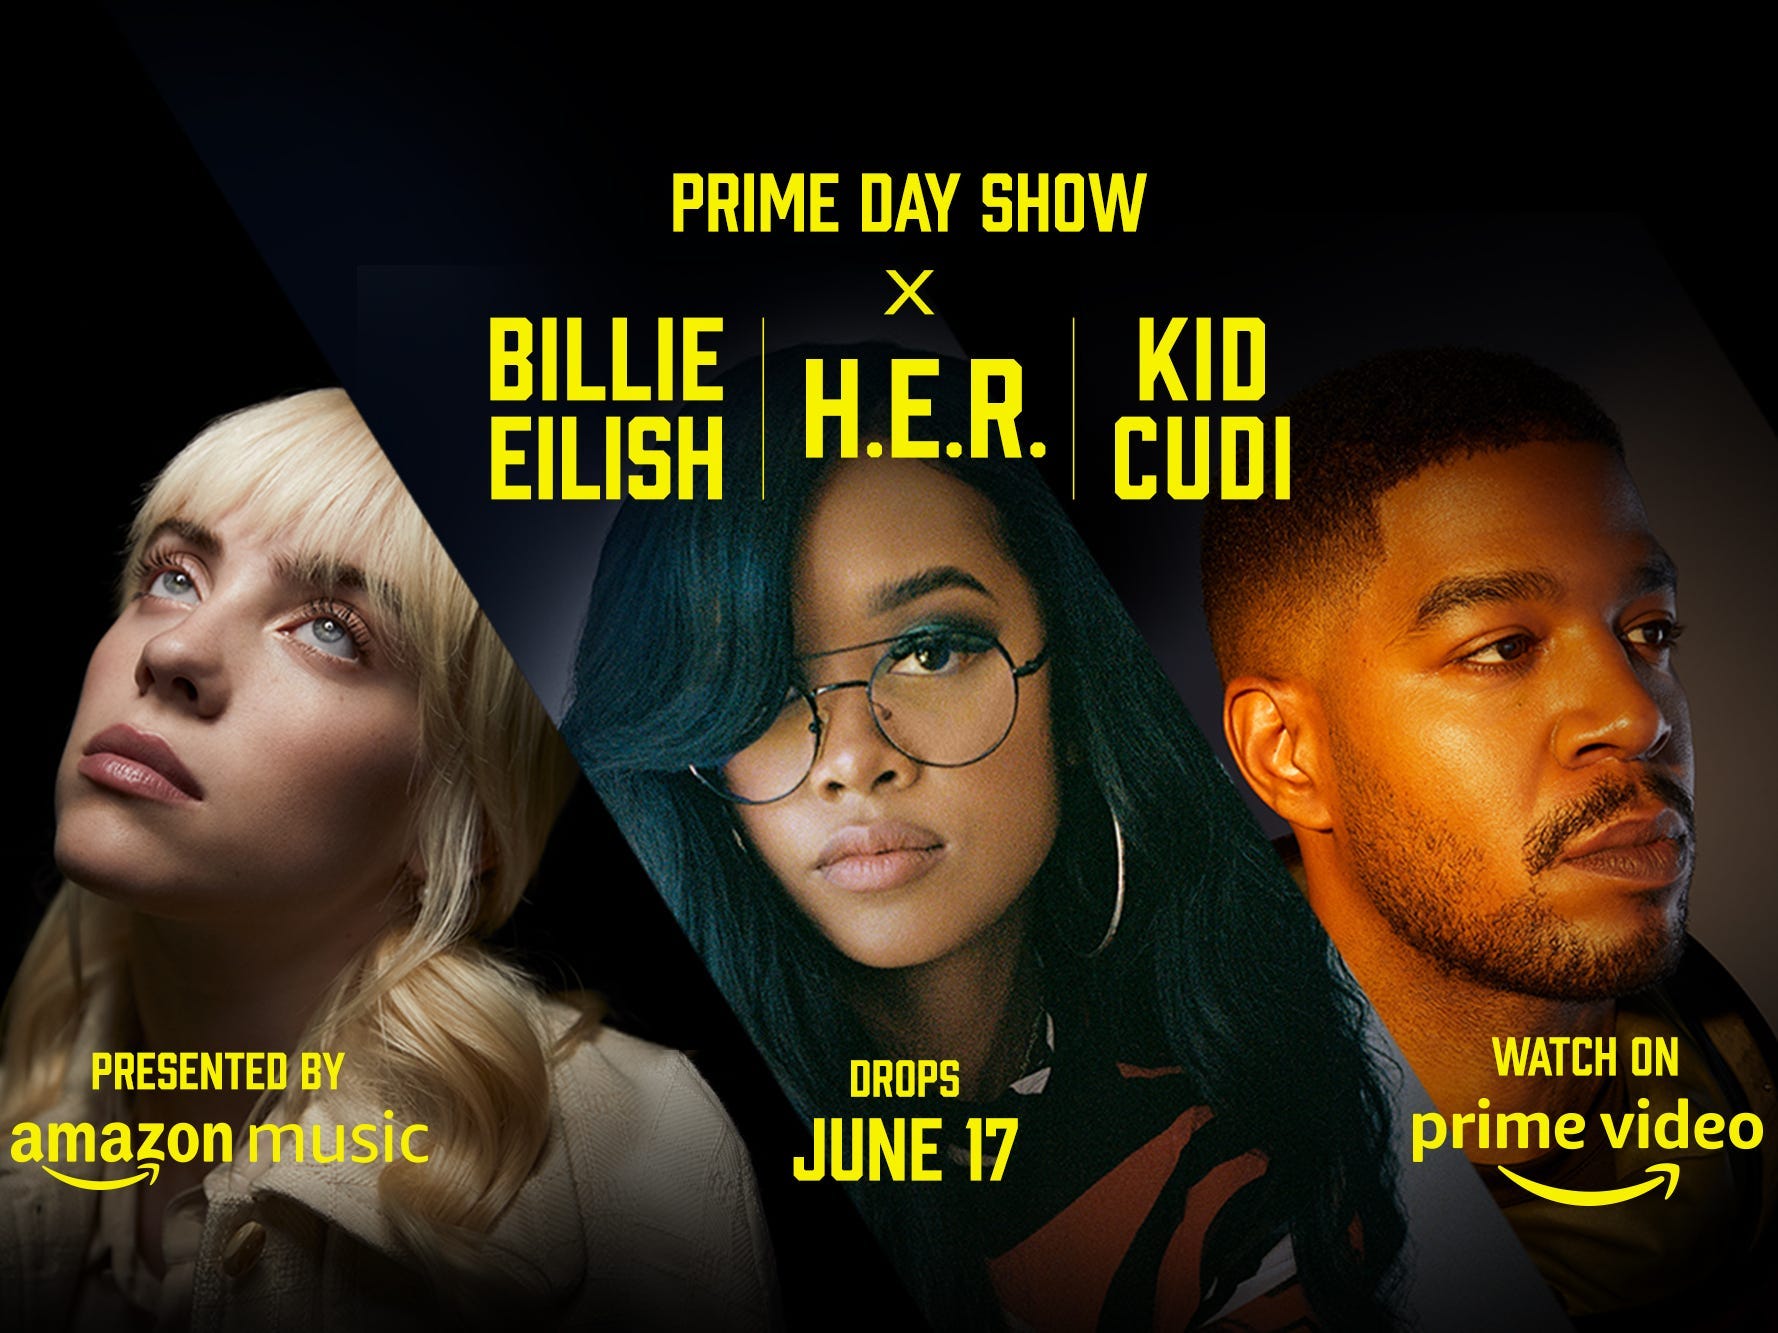 Amazon Prime Day Show features Billie Eilish, H.E.R. and Kid Cudi.